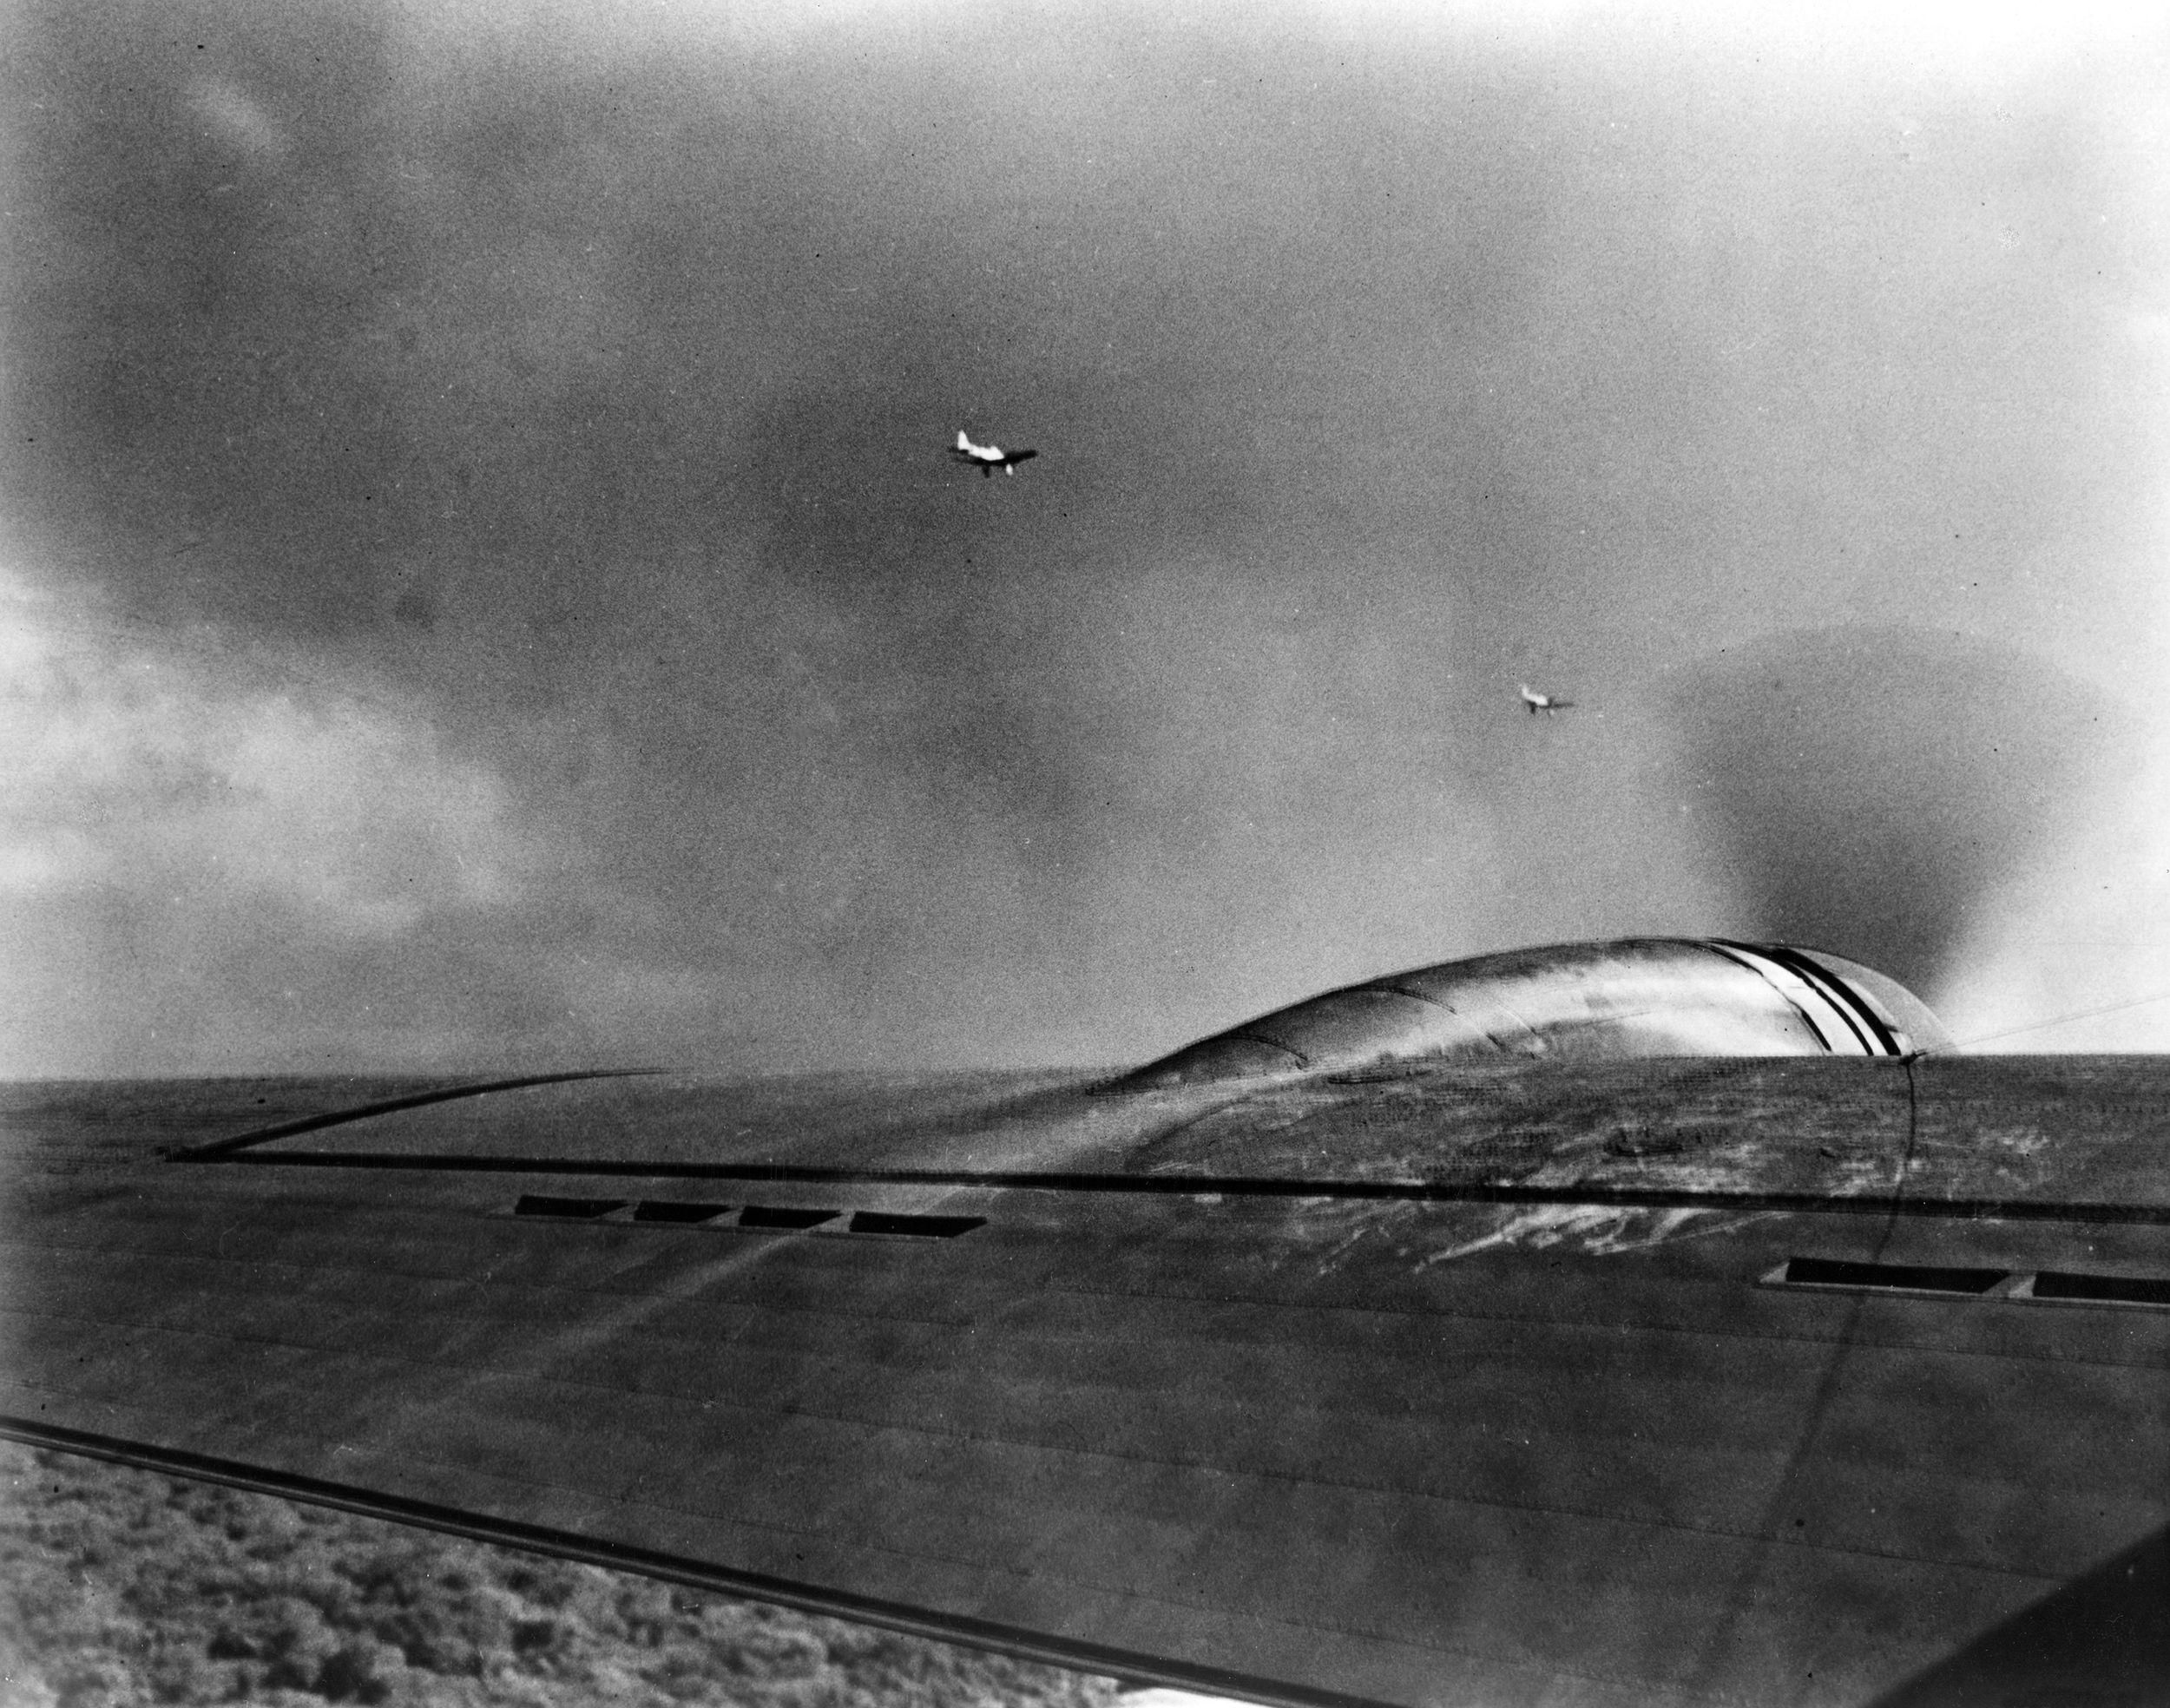 A pair of Japanese Aichi D3A “Val” dive bombers flies near the B-17E bomber piloted by Lieutenant Karl T. Barthelmess in this photo taken by Sergeant Lee Embree. The American plane was one of several B-17s from the 38th Reconnaissance Squadron that were caught up in the aerial melee above Oahu.